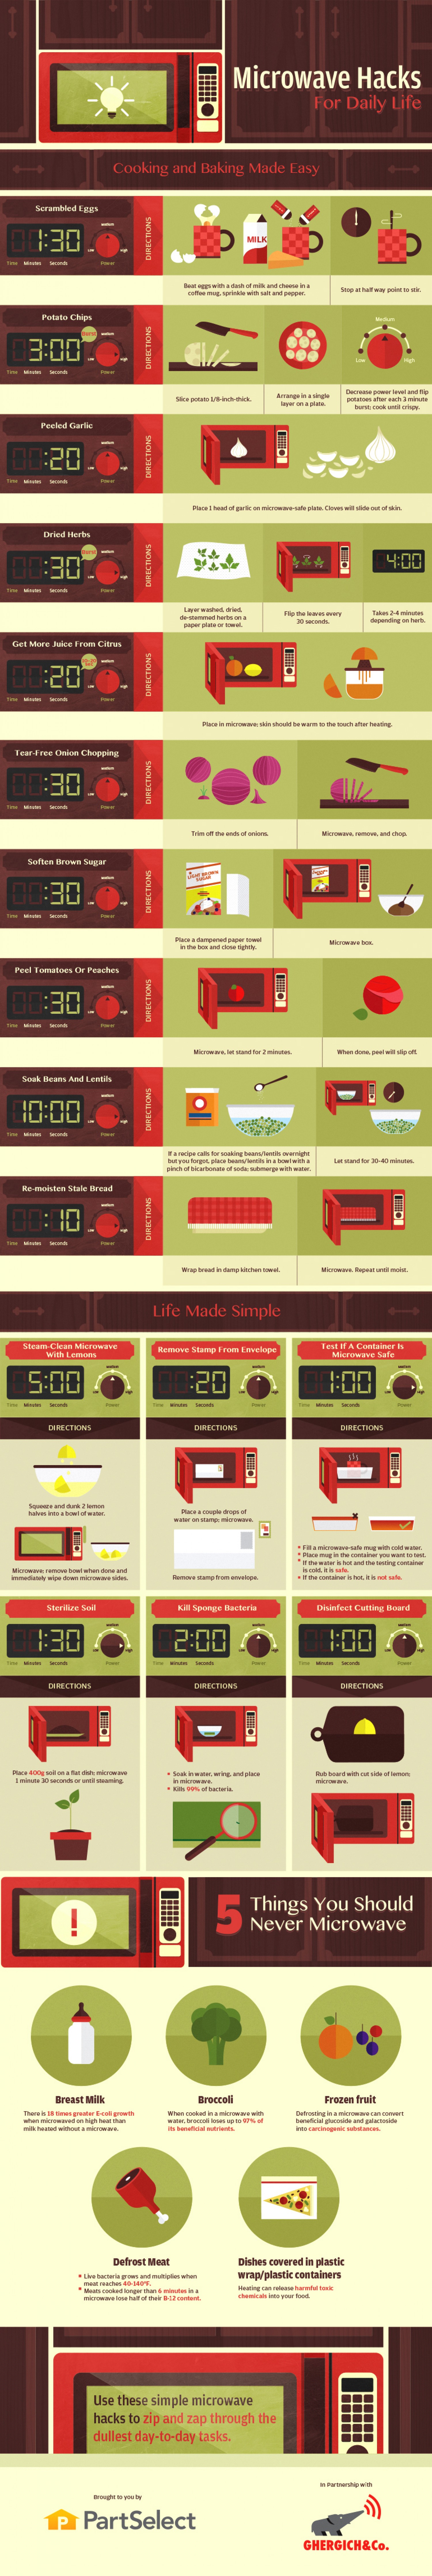 Cheat Sheet For Clever Microwave Uses